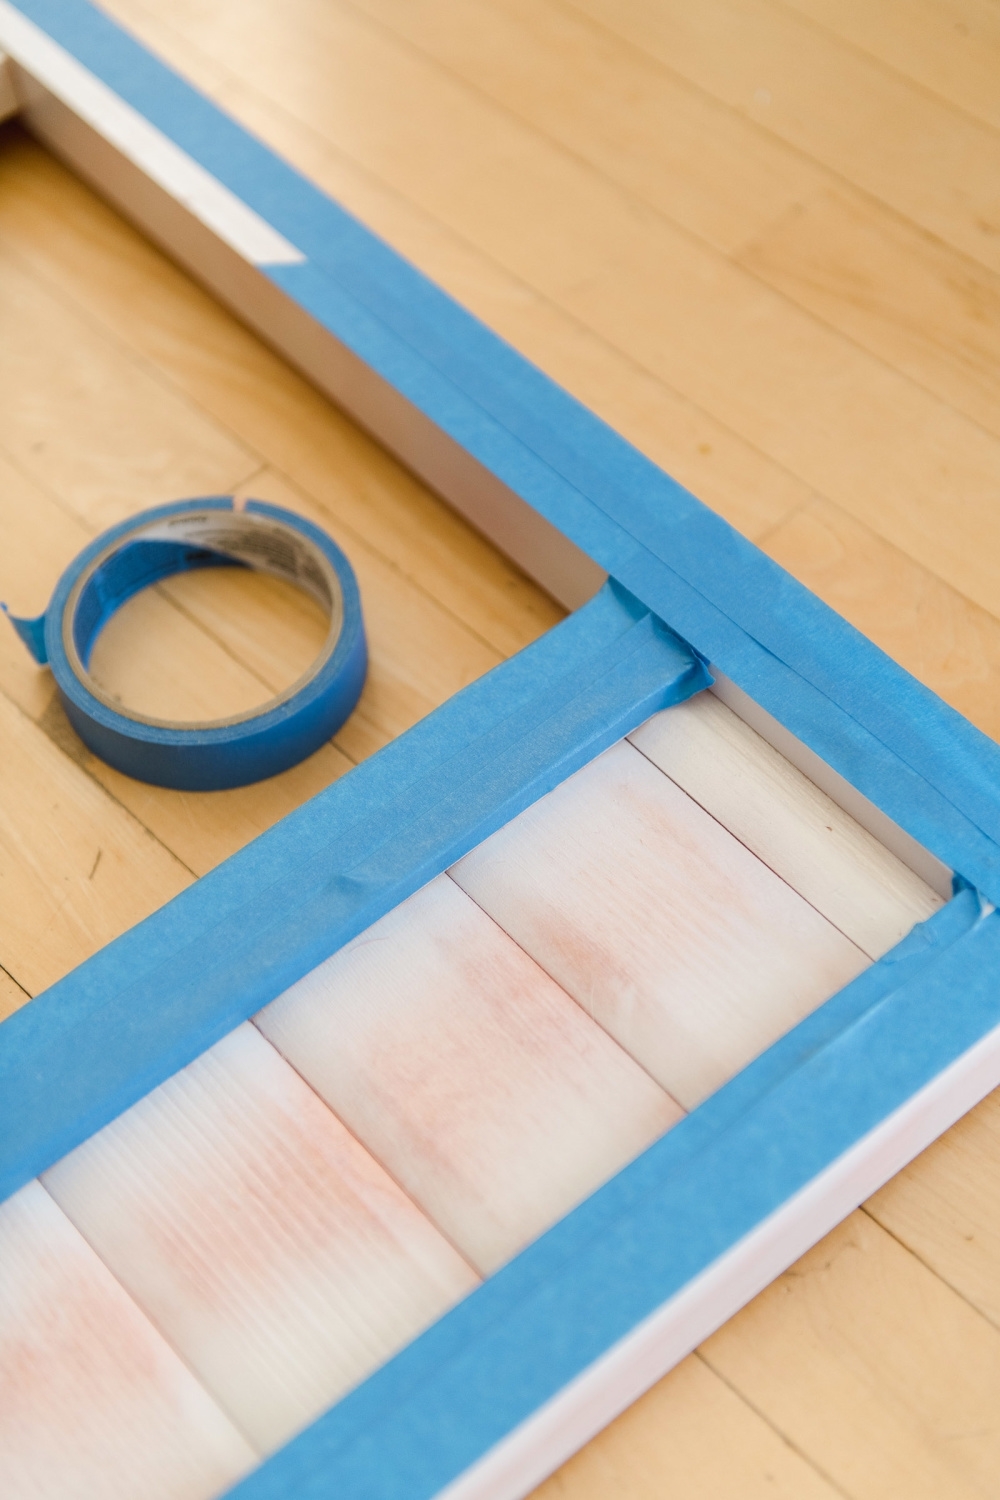 Paint edge pieces, allow to dry, and cover with painter’s tape